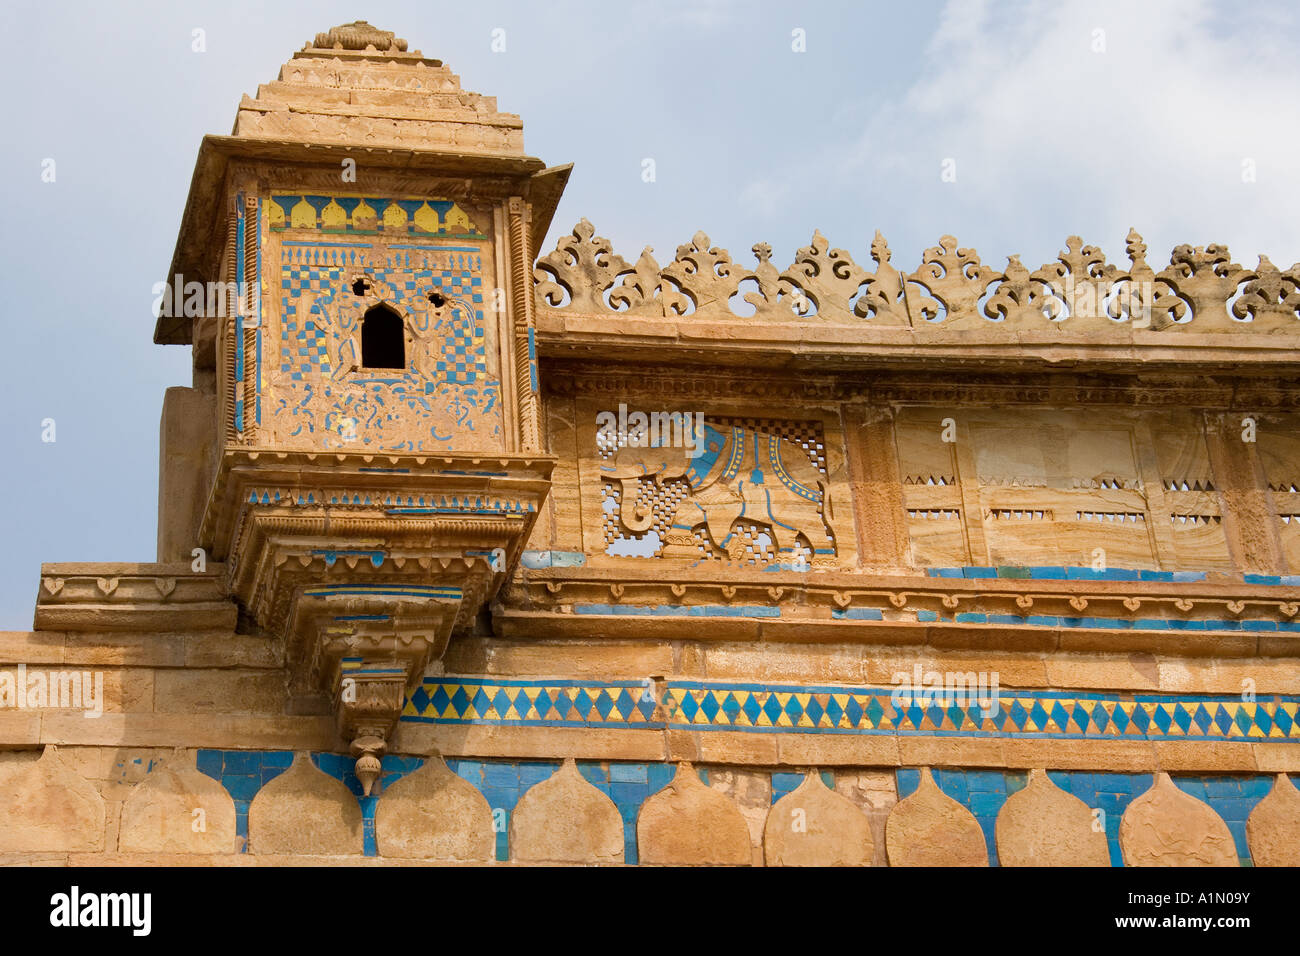 Stone latticework on the Man Mandir Palace or Gwalior Fort in the town of Gwalior in Central India Stock Photo